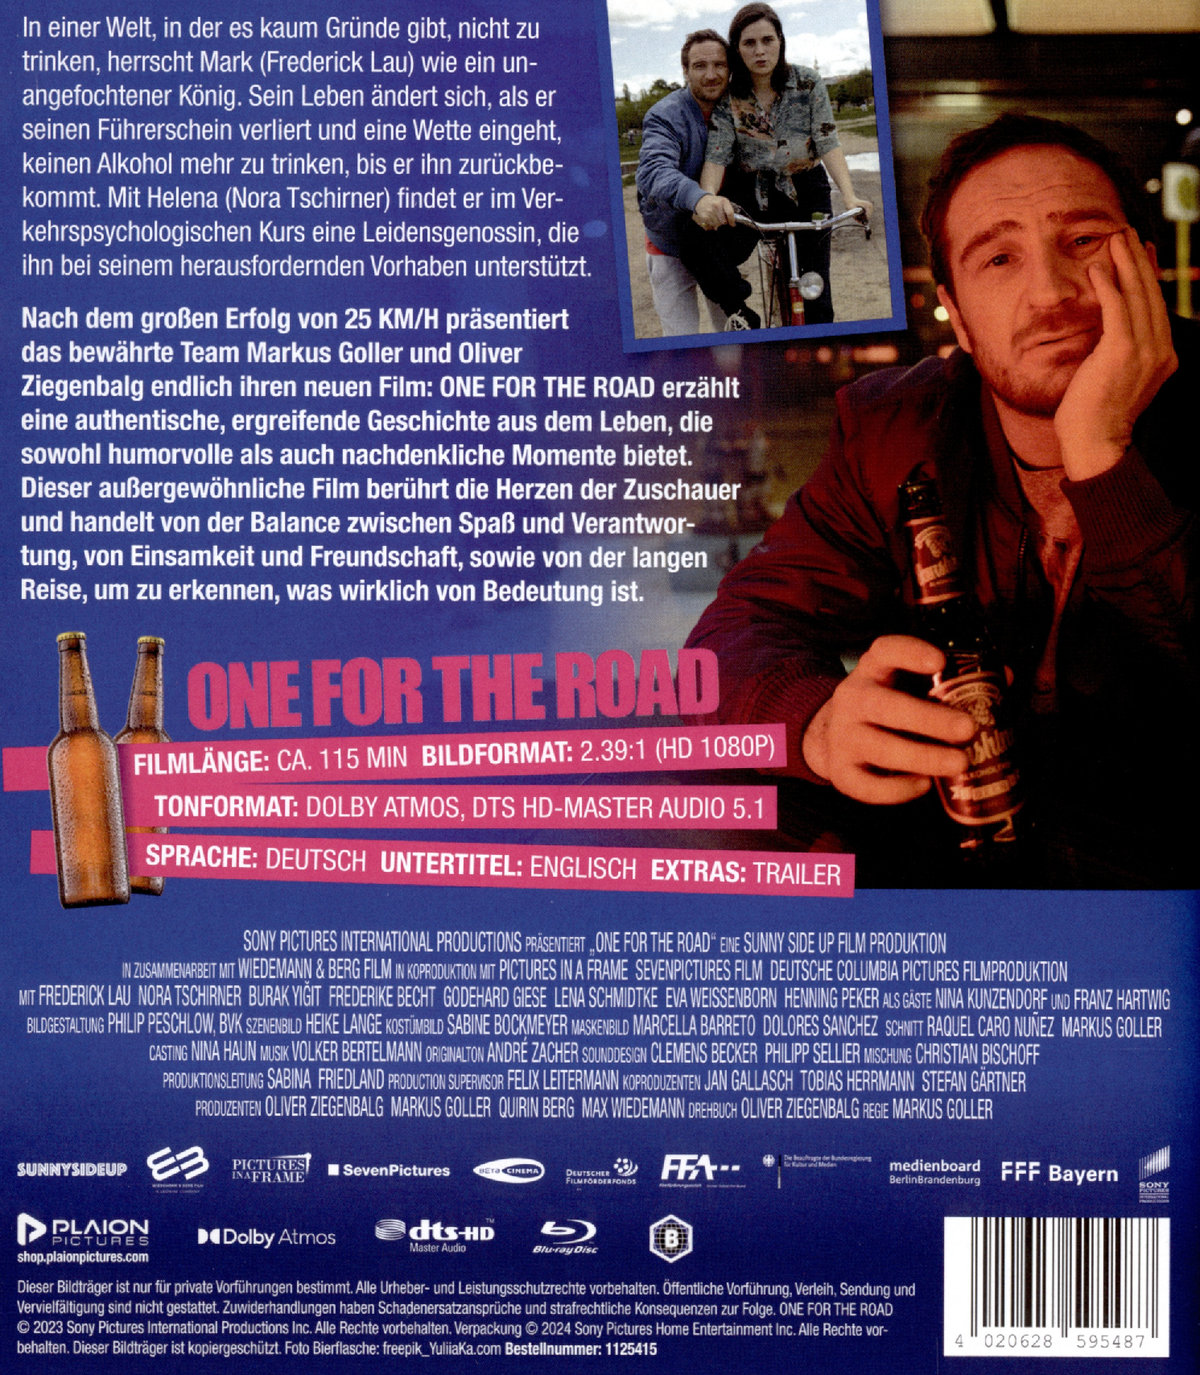 One for the Road  (Blu-ray Disc)